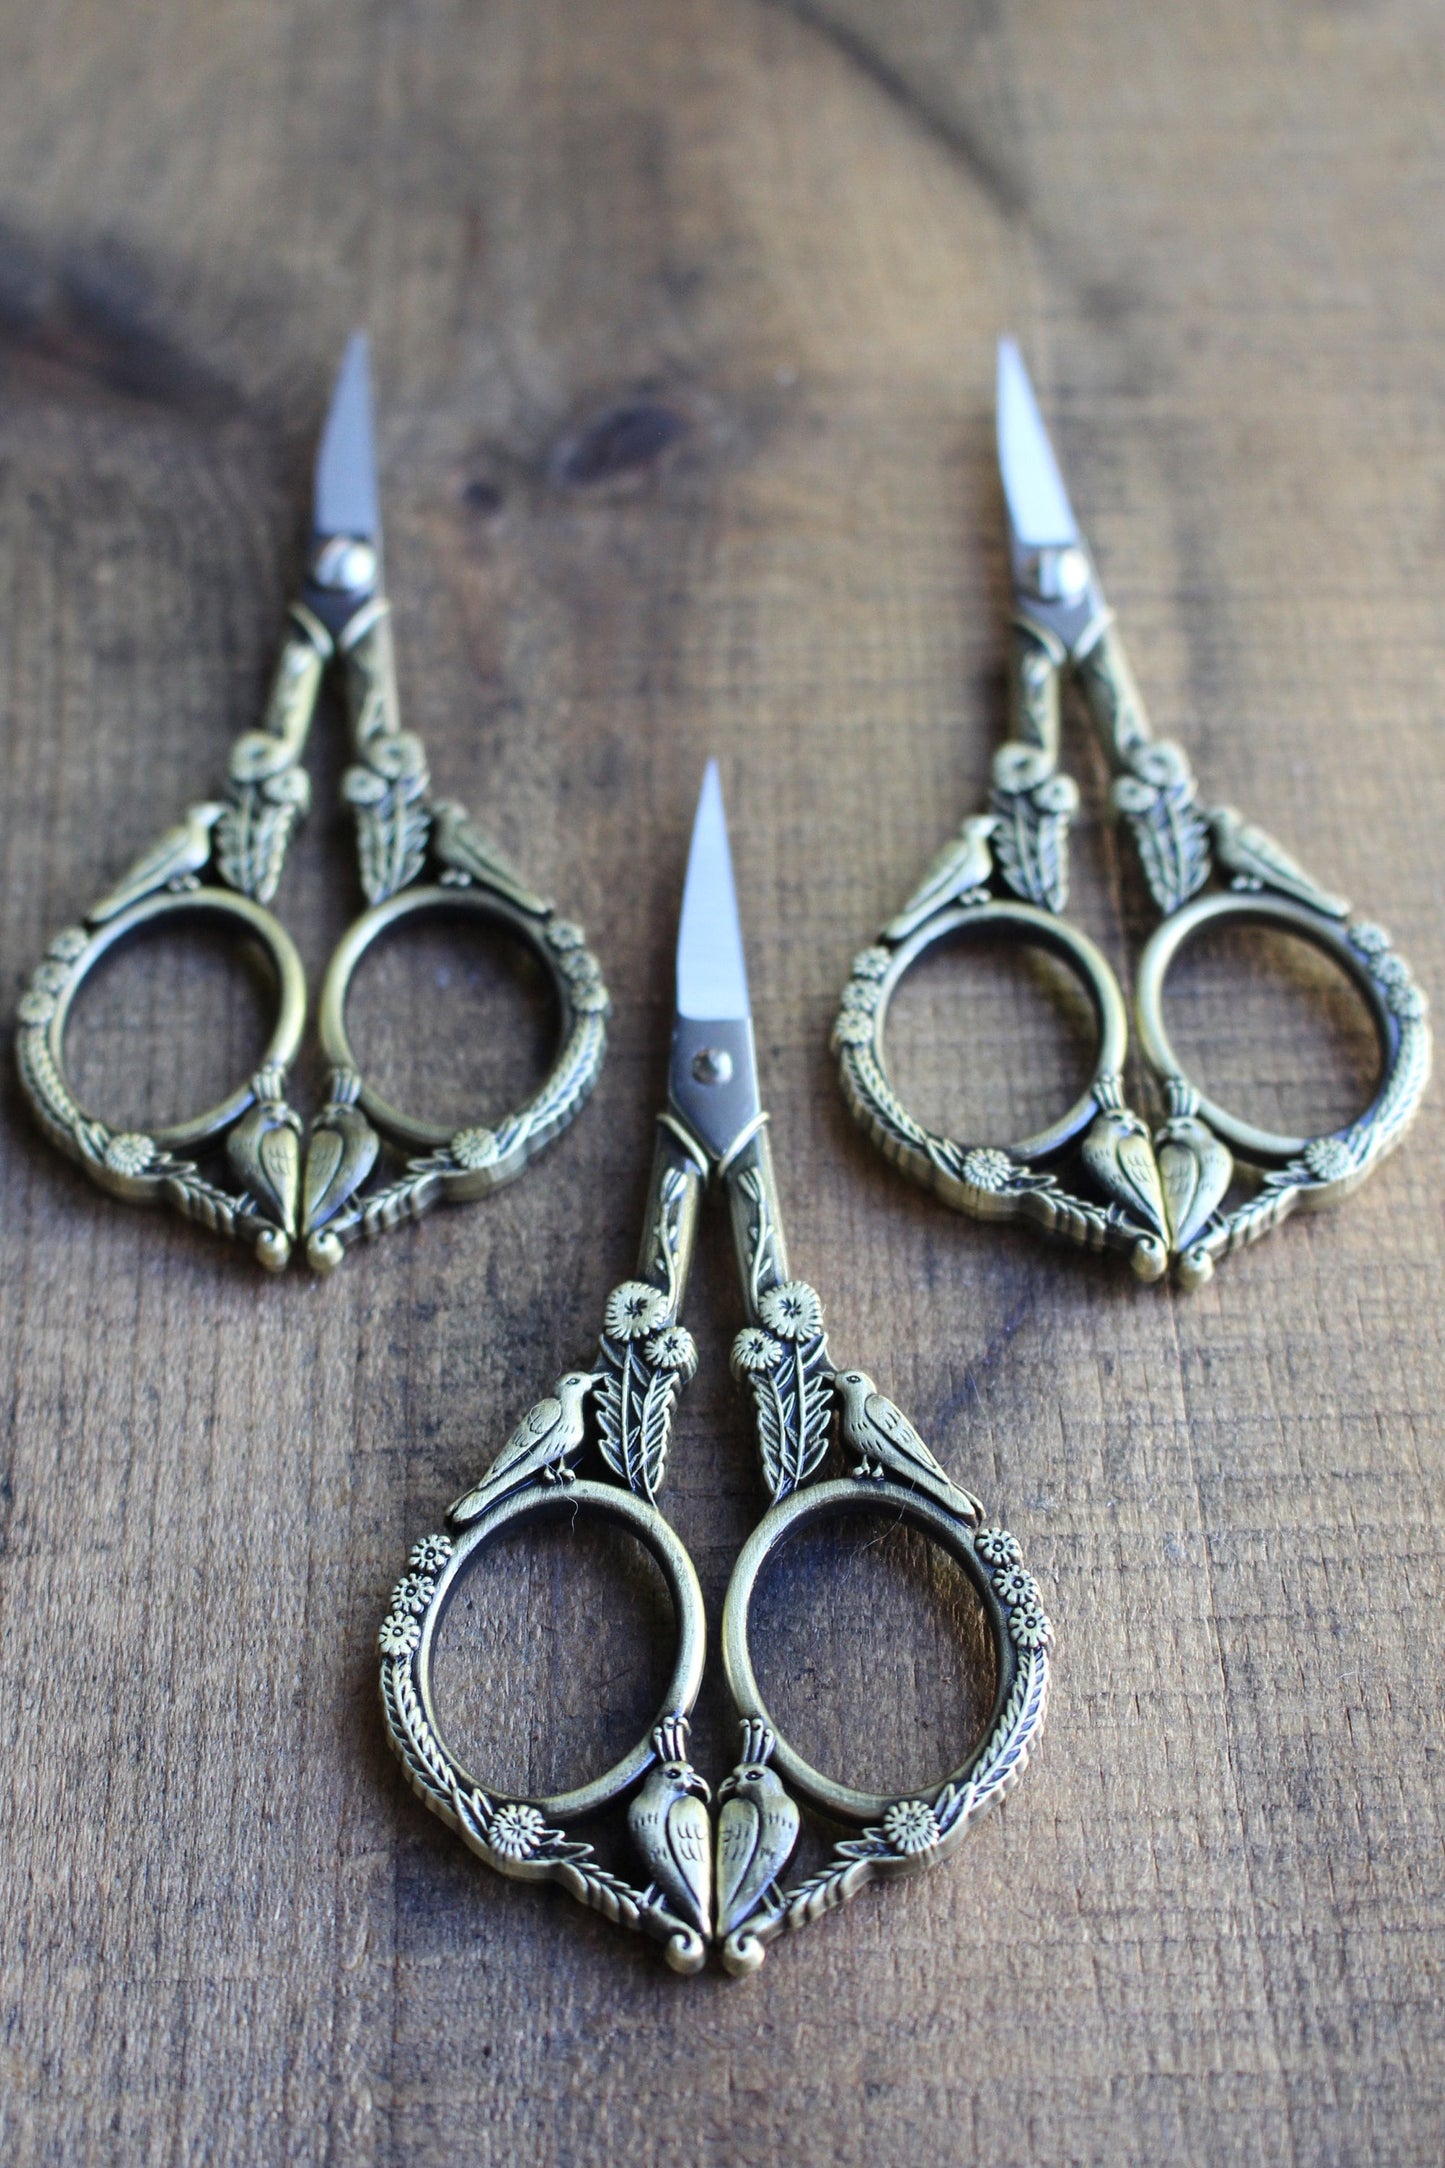 Feathered Friends Embroidery Scissors in antique gold